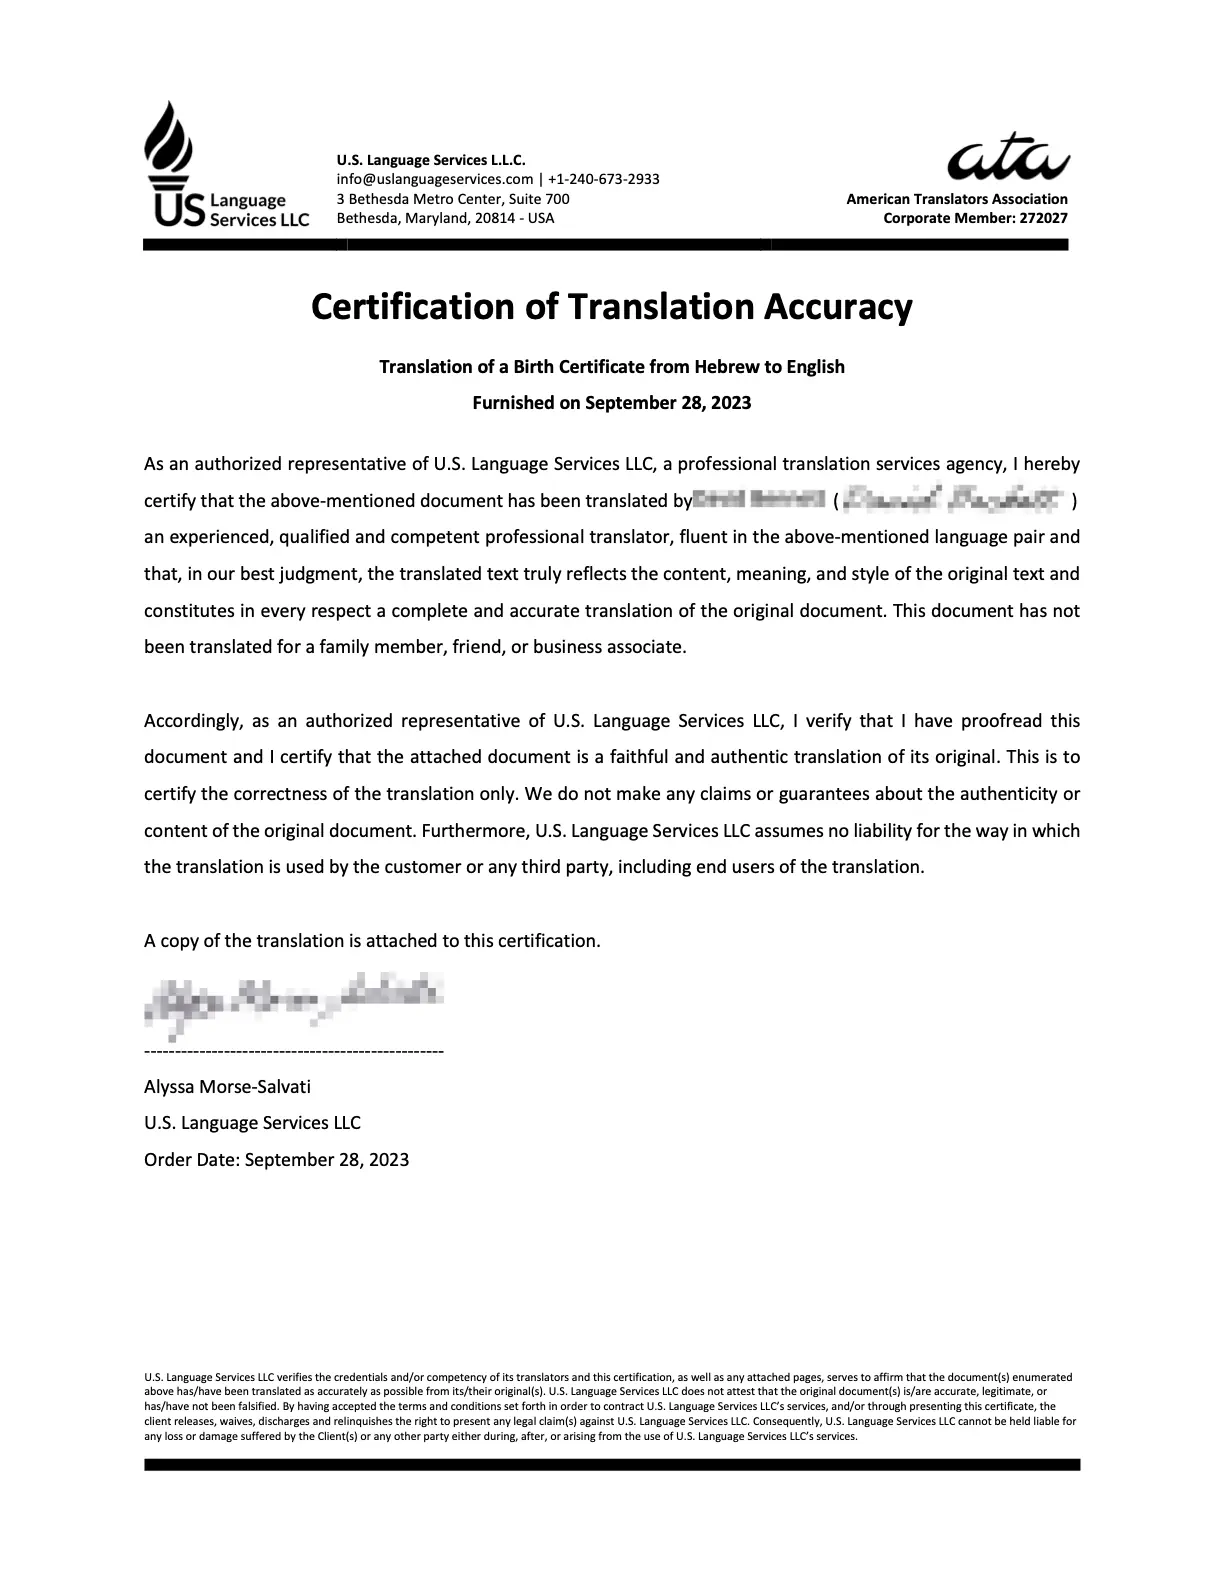 Certified Hebrew to English translation - Certificate Sample